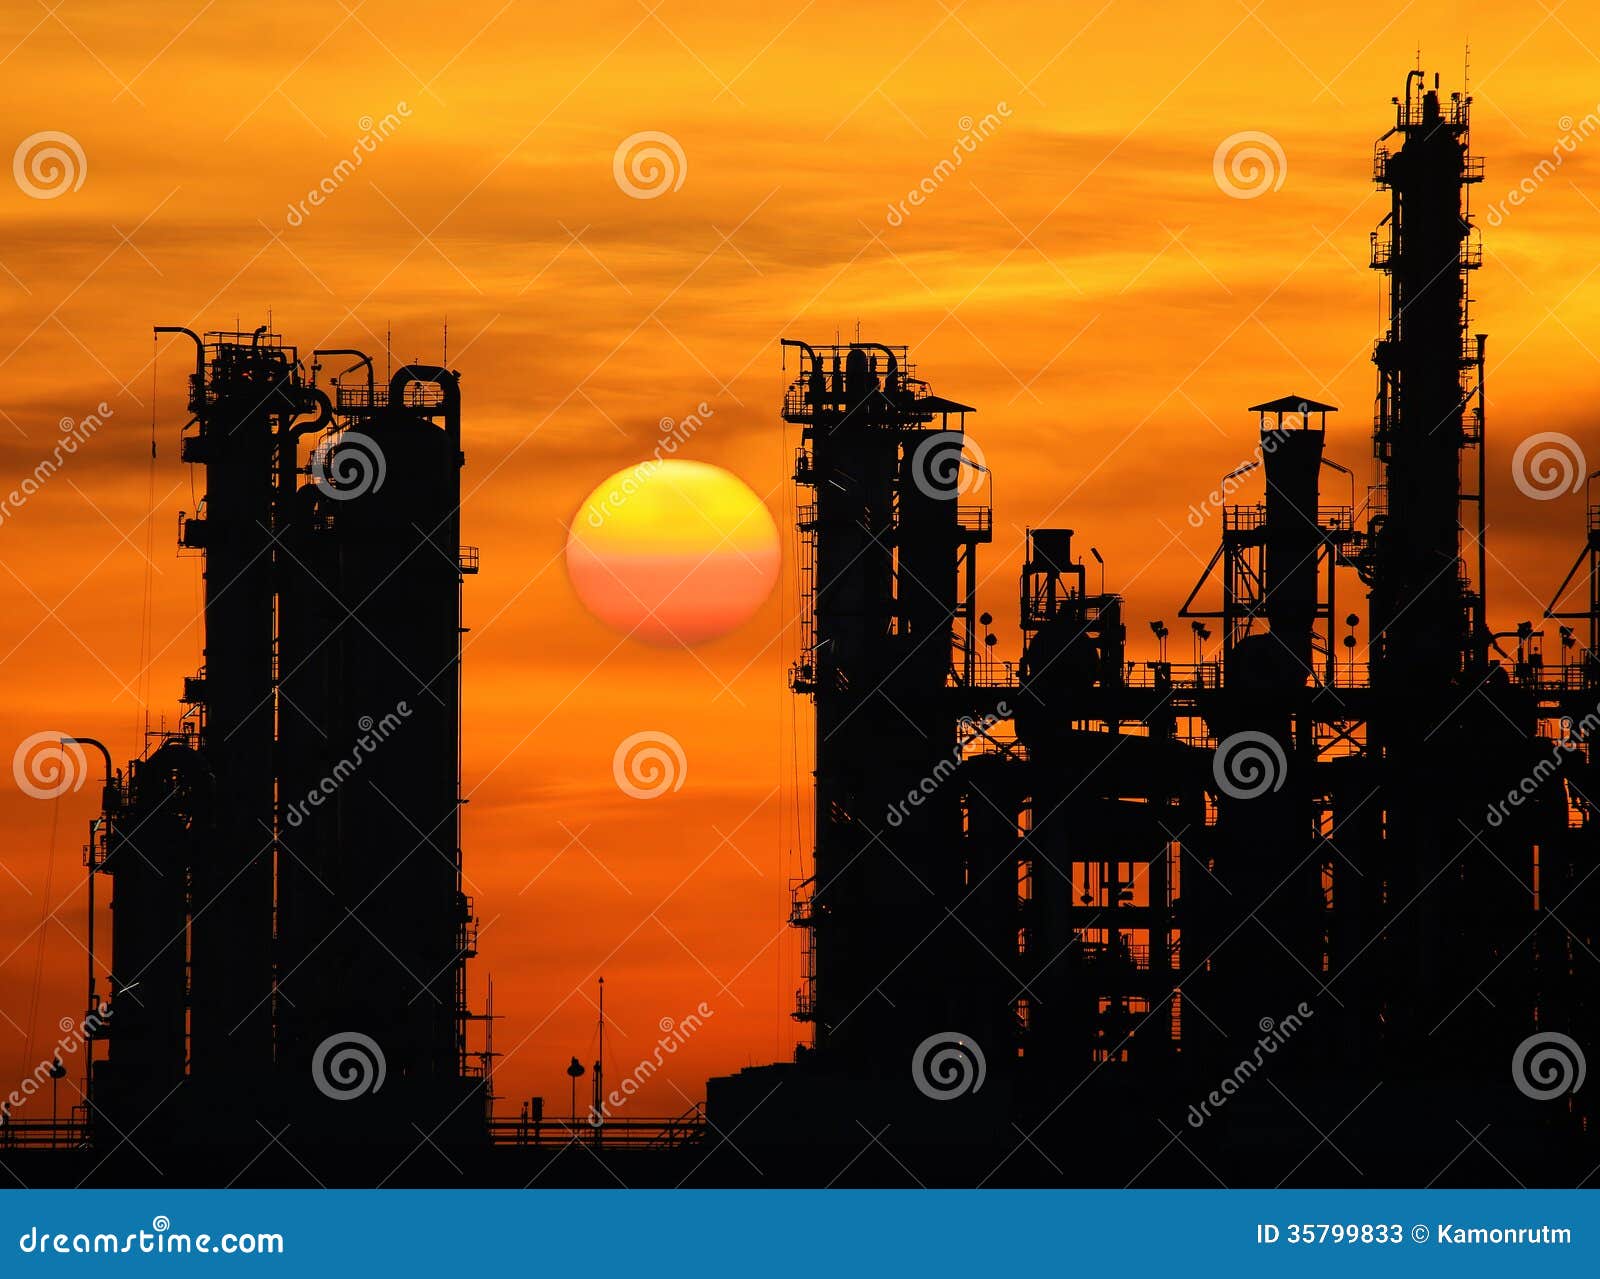 Silhouette Tower Of Oil Refinery Stock Photos - Image: 35799833